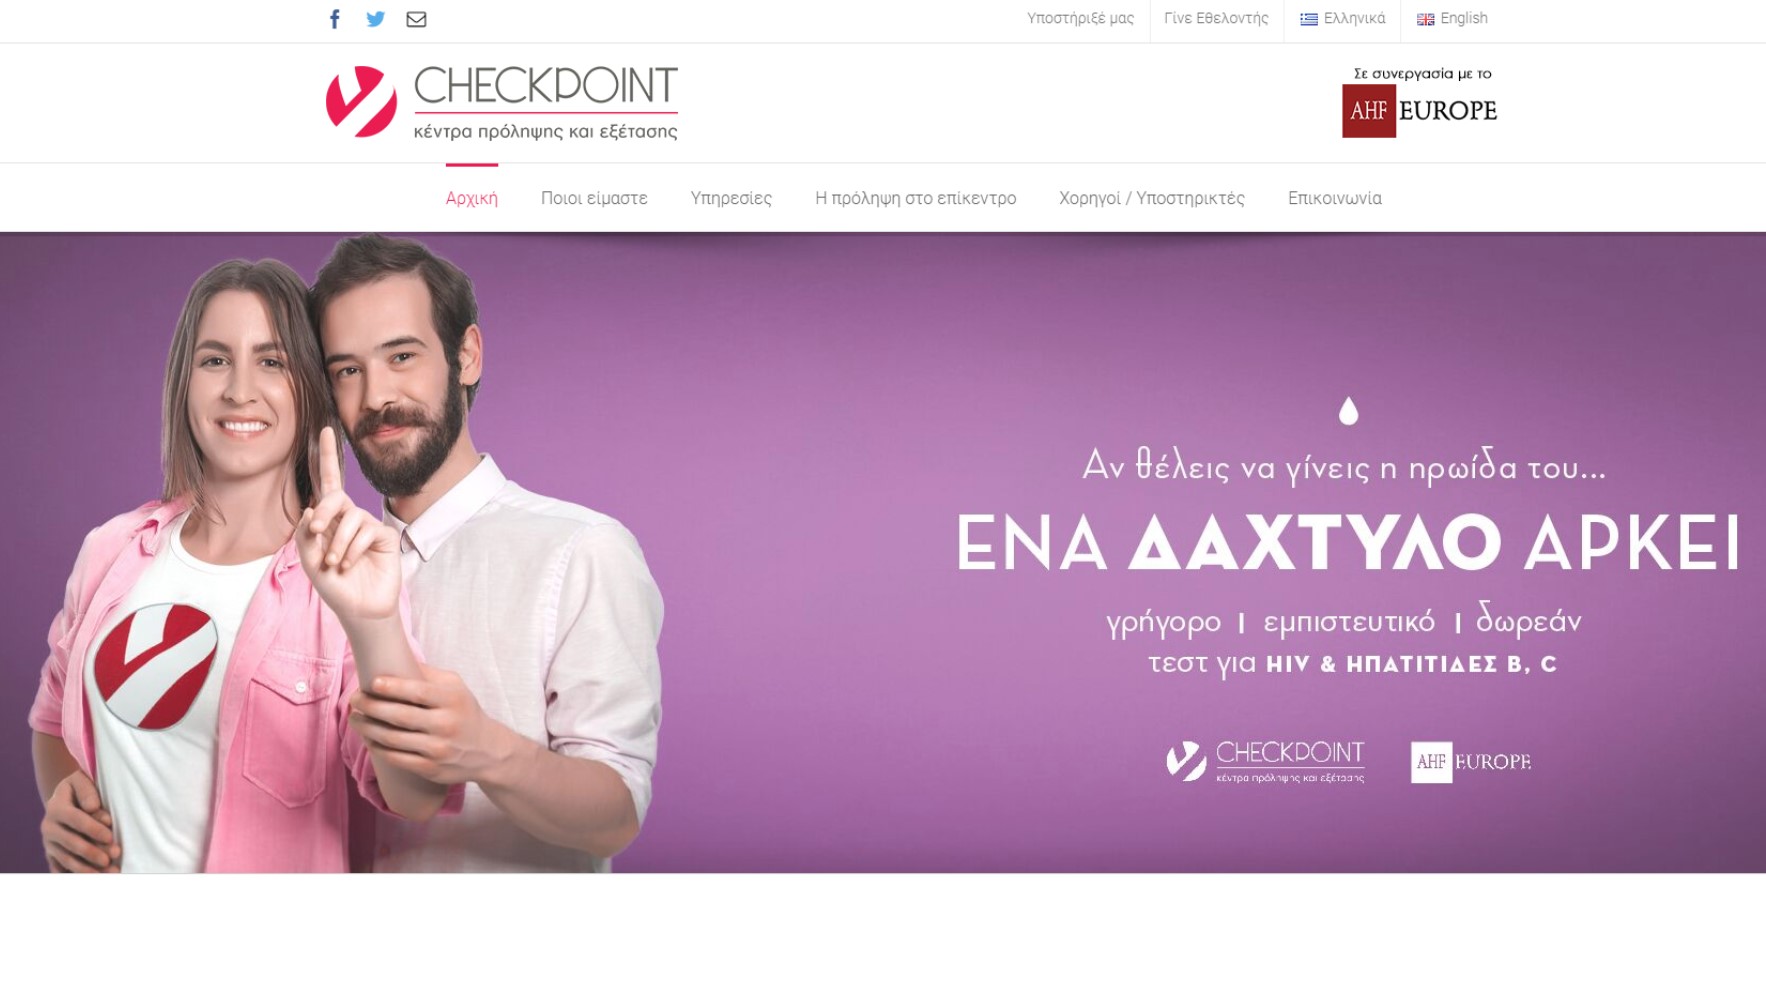 Featured image for “ΝΕΑ ΙΣΤΟΣΕΛΙΔΑ ΑΠΟ ΤΑ “CHECKPOINT””